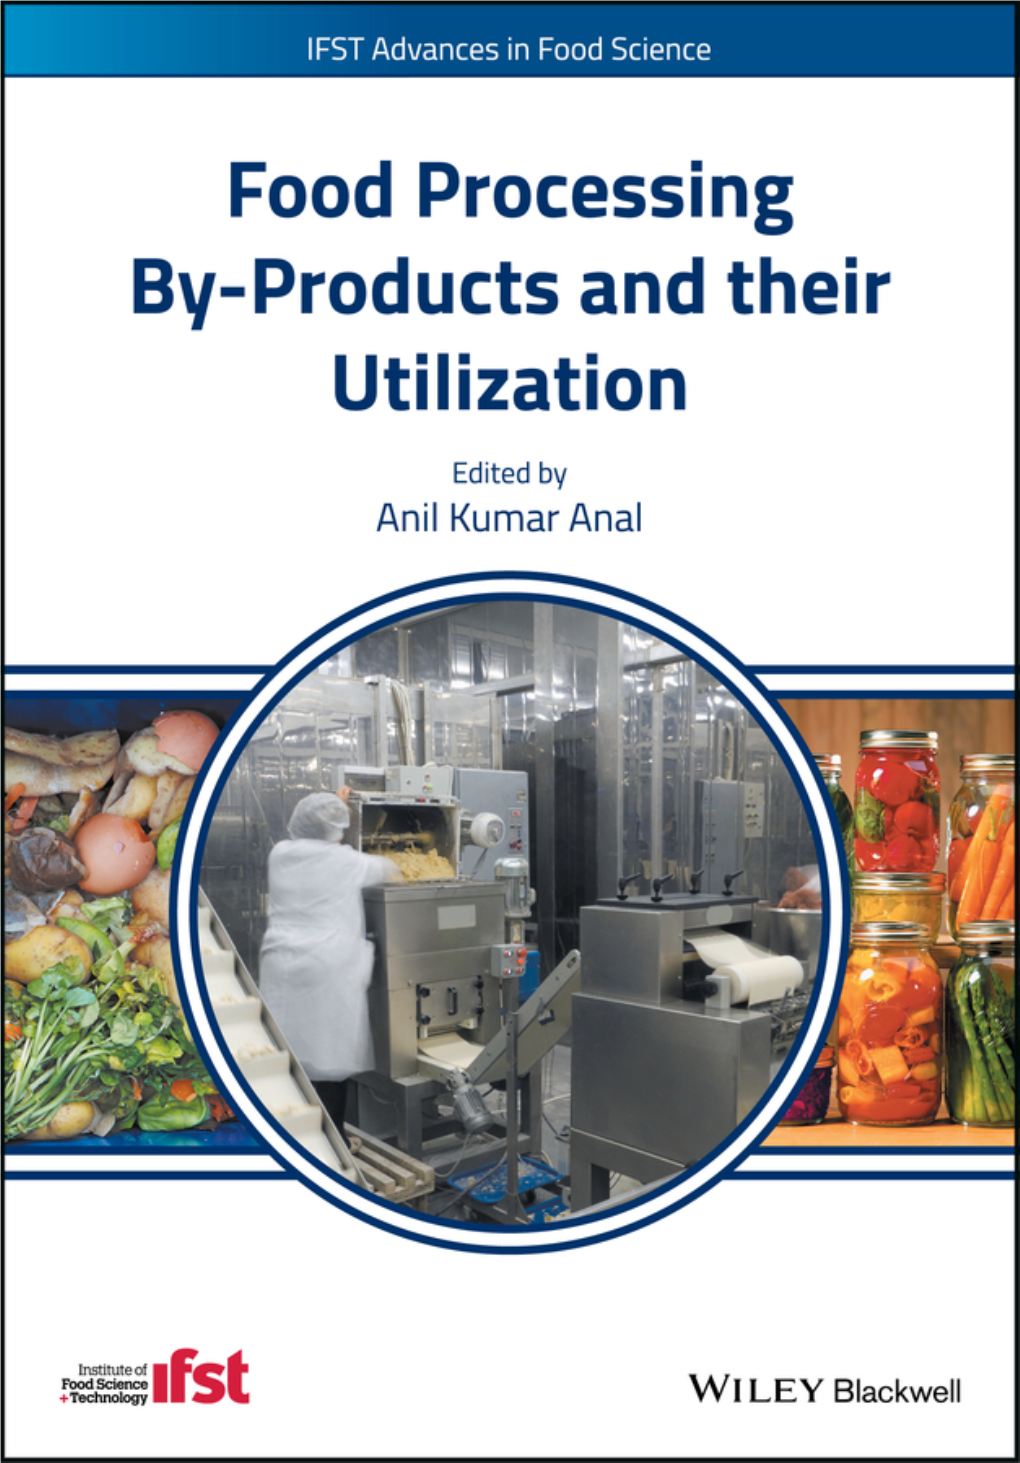 1.2 Food Processing Wastes and By-Products for Industrial Applications